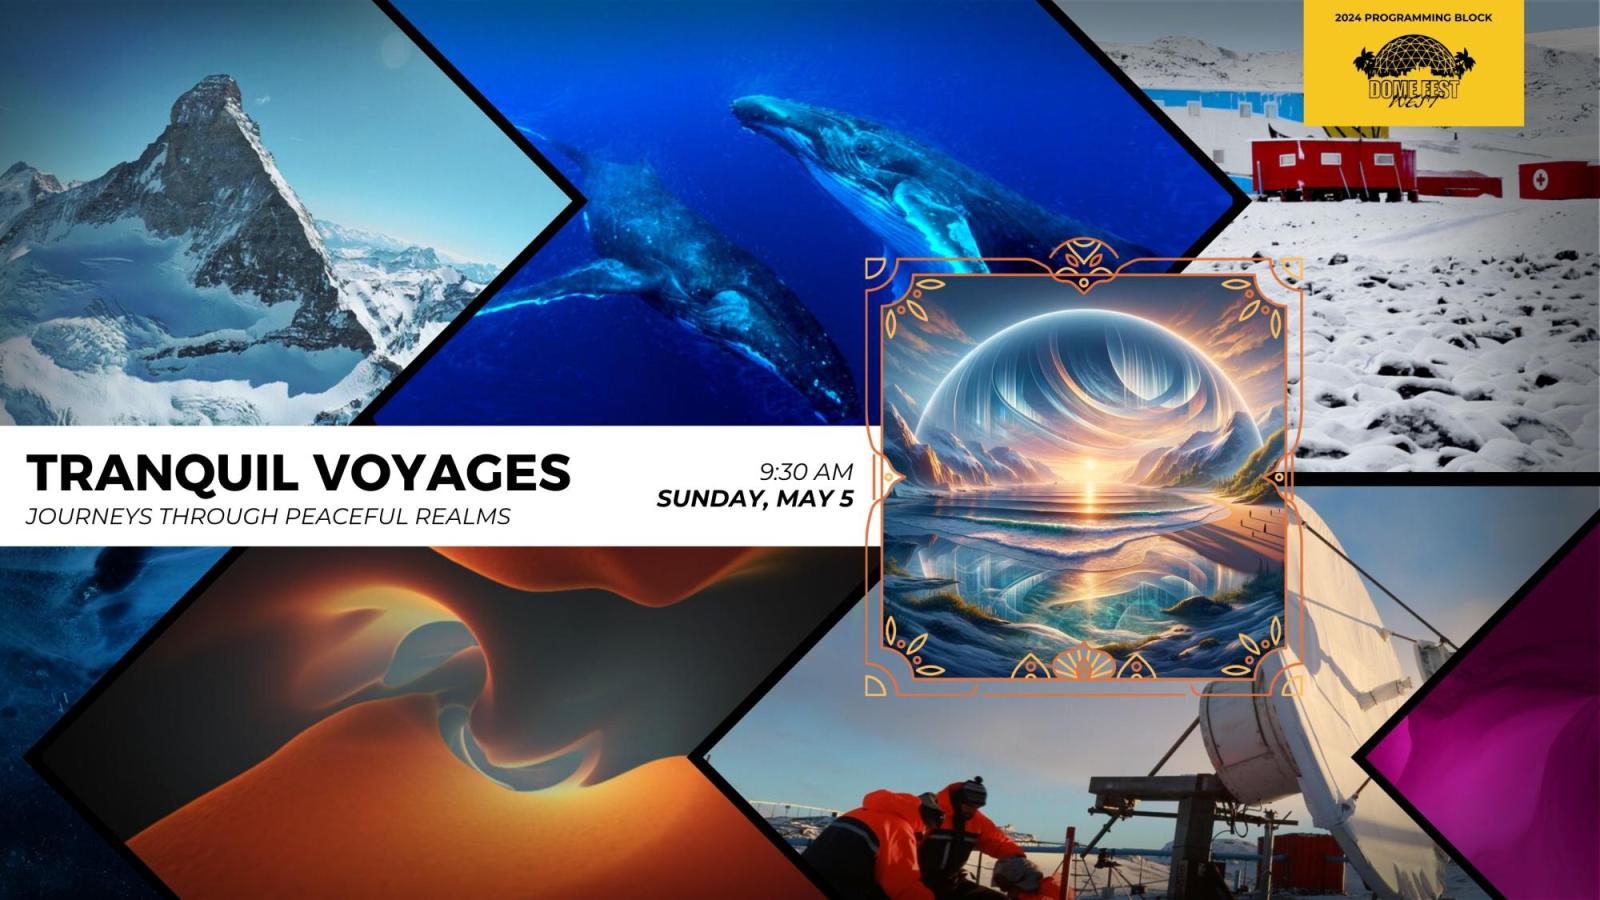 Tranquil Voyages text with Dome Fest West logo and 7 still images from films